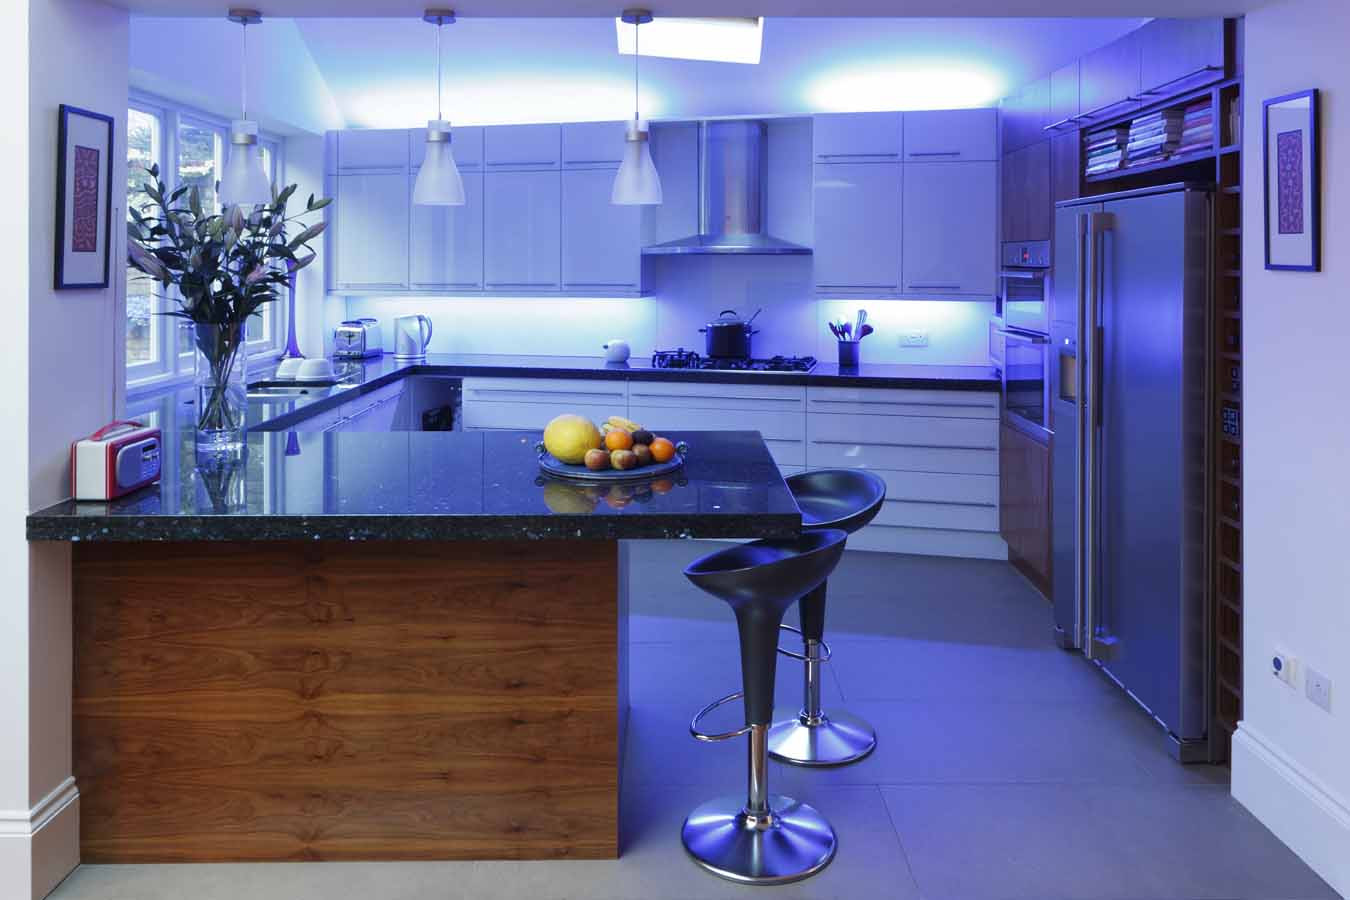 recommend type of led light for kitchen